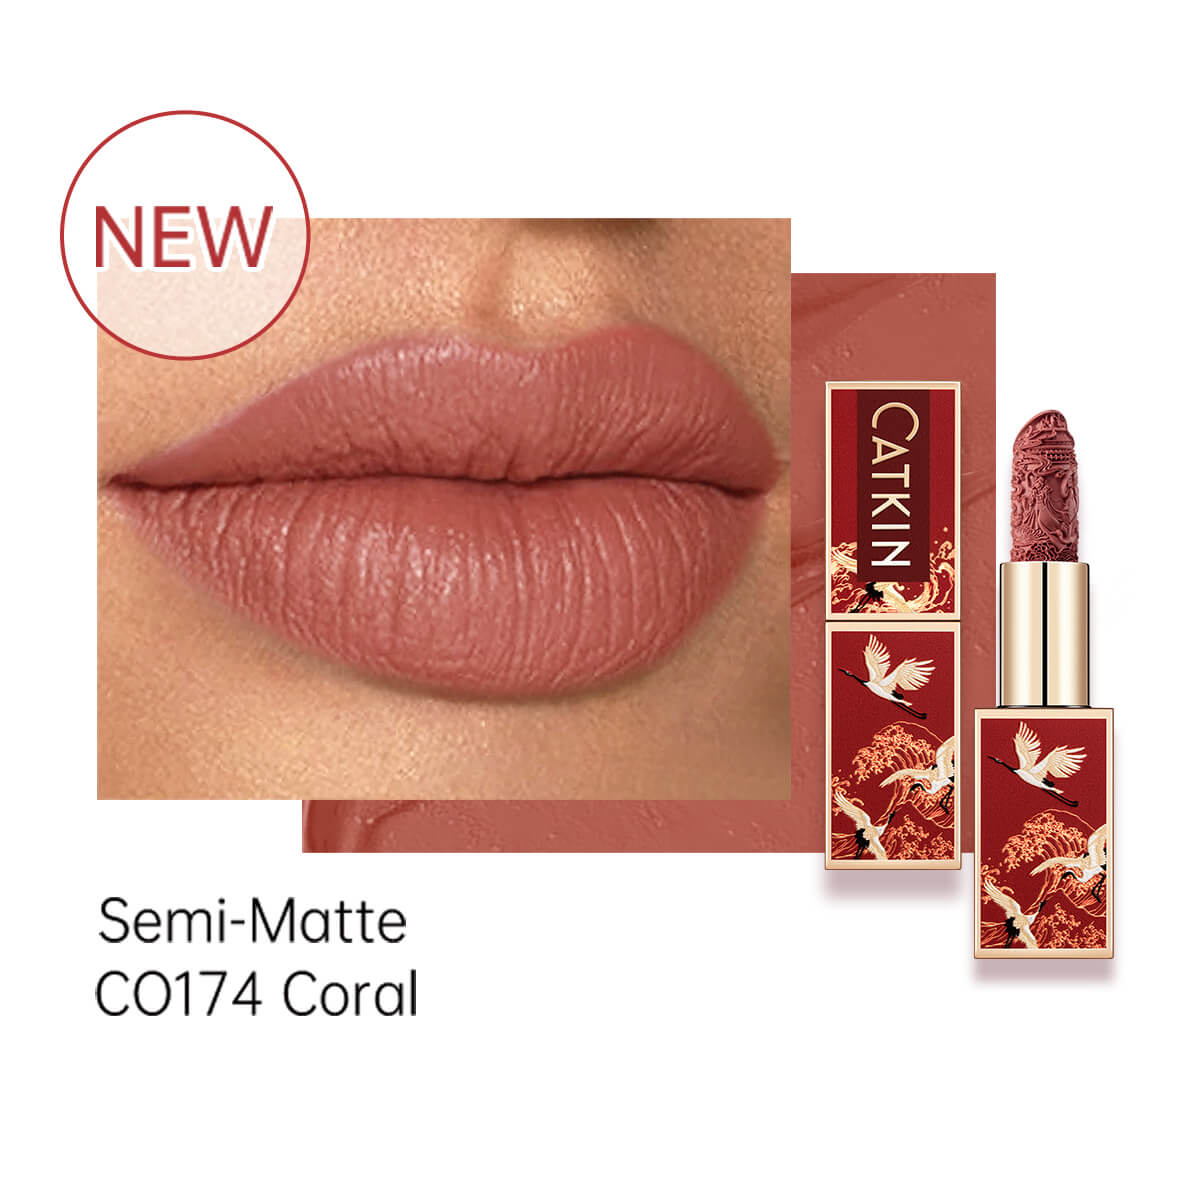 CATKIN Rouge Carving Lipstick